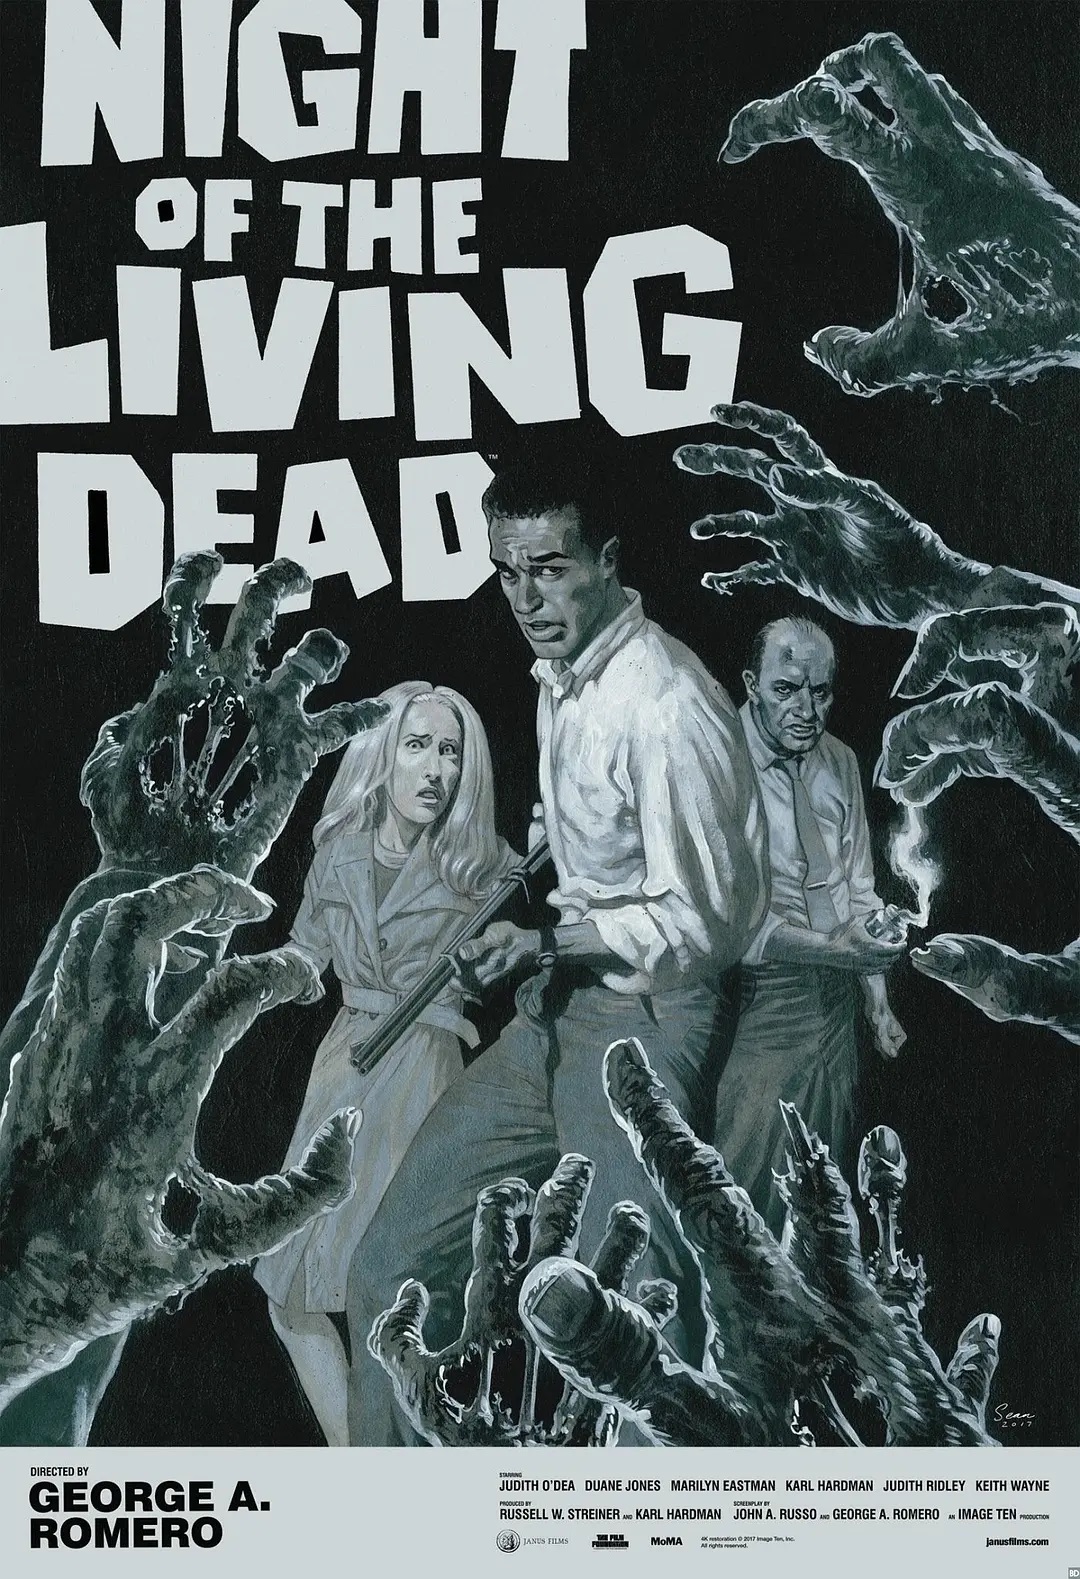  free-movies-on-youtube-Night-of-the-Living-Dead  